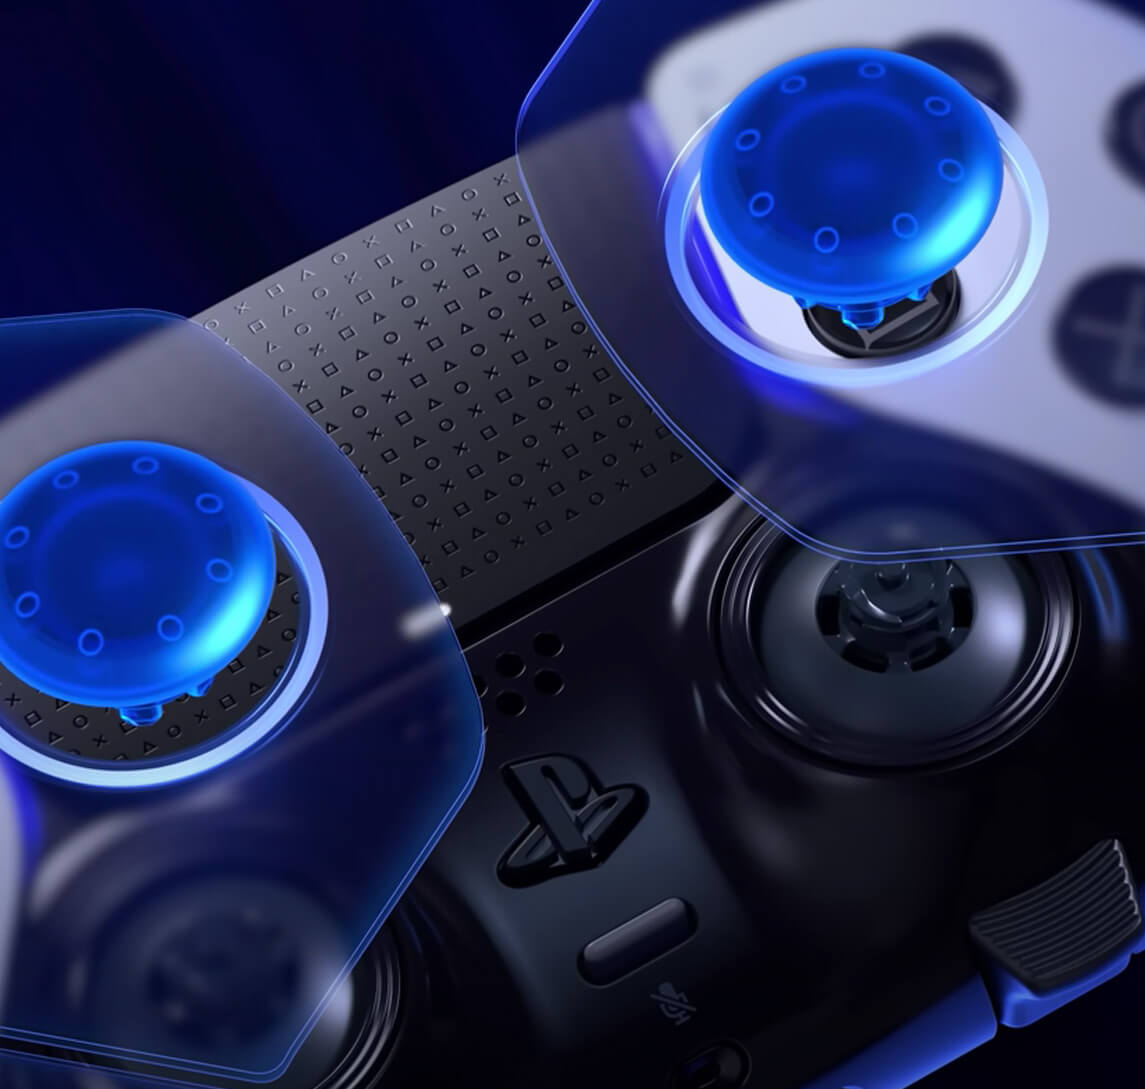 PS5 dualsense edge controller: Price and where to buy in UK